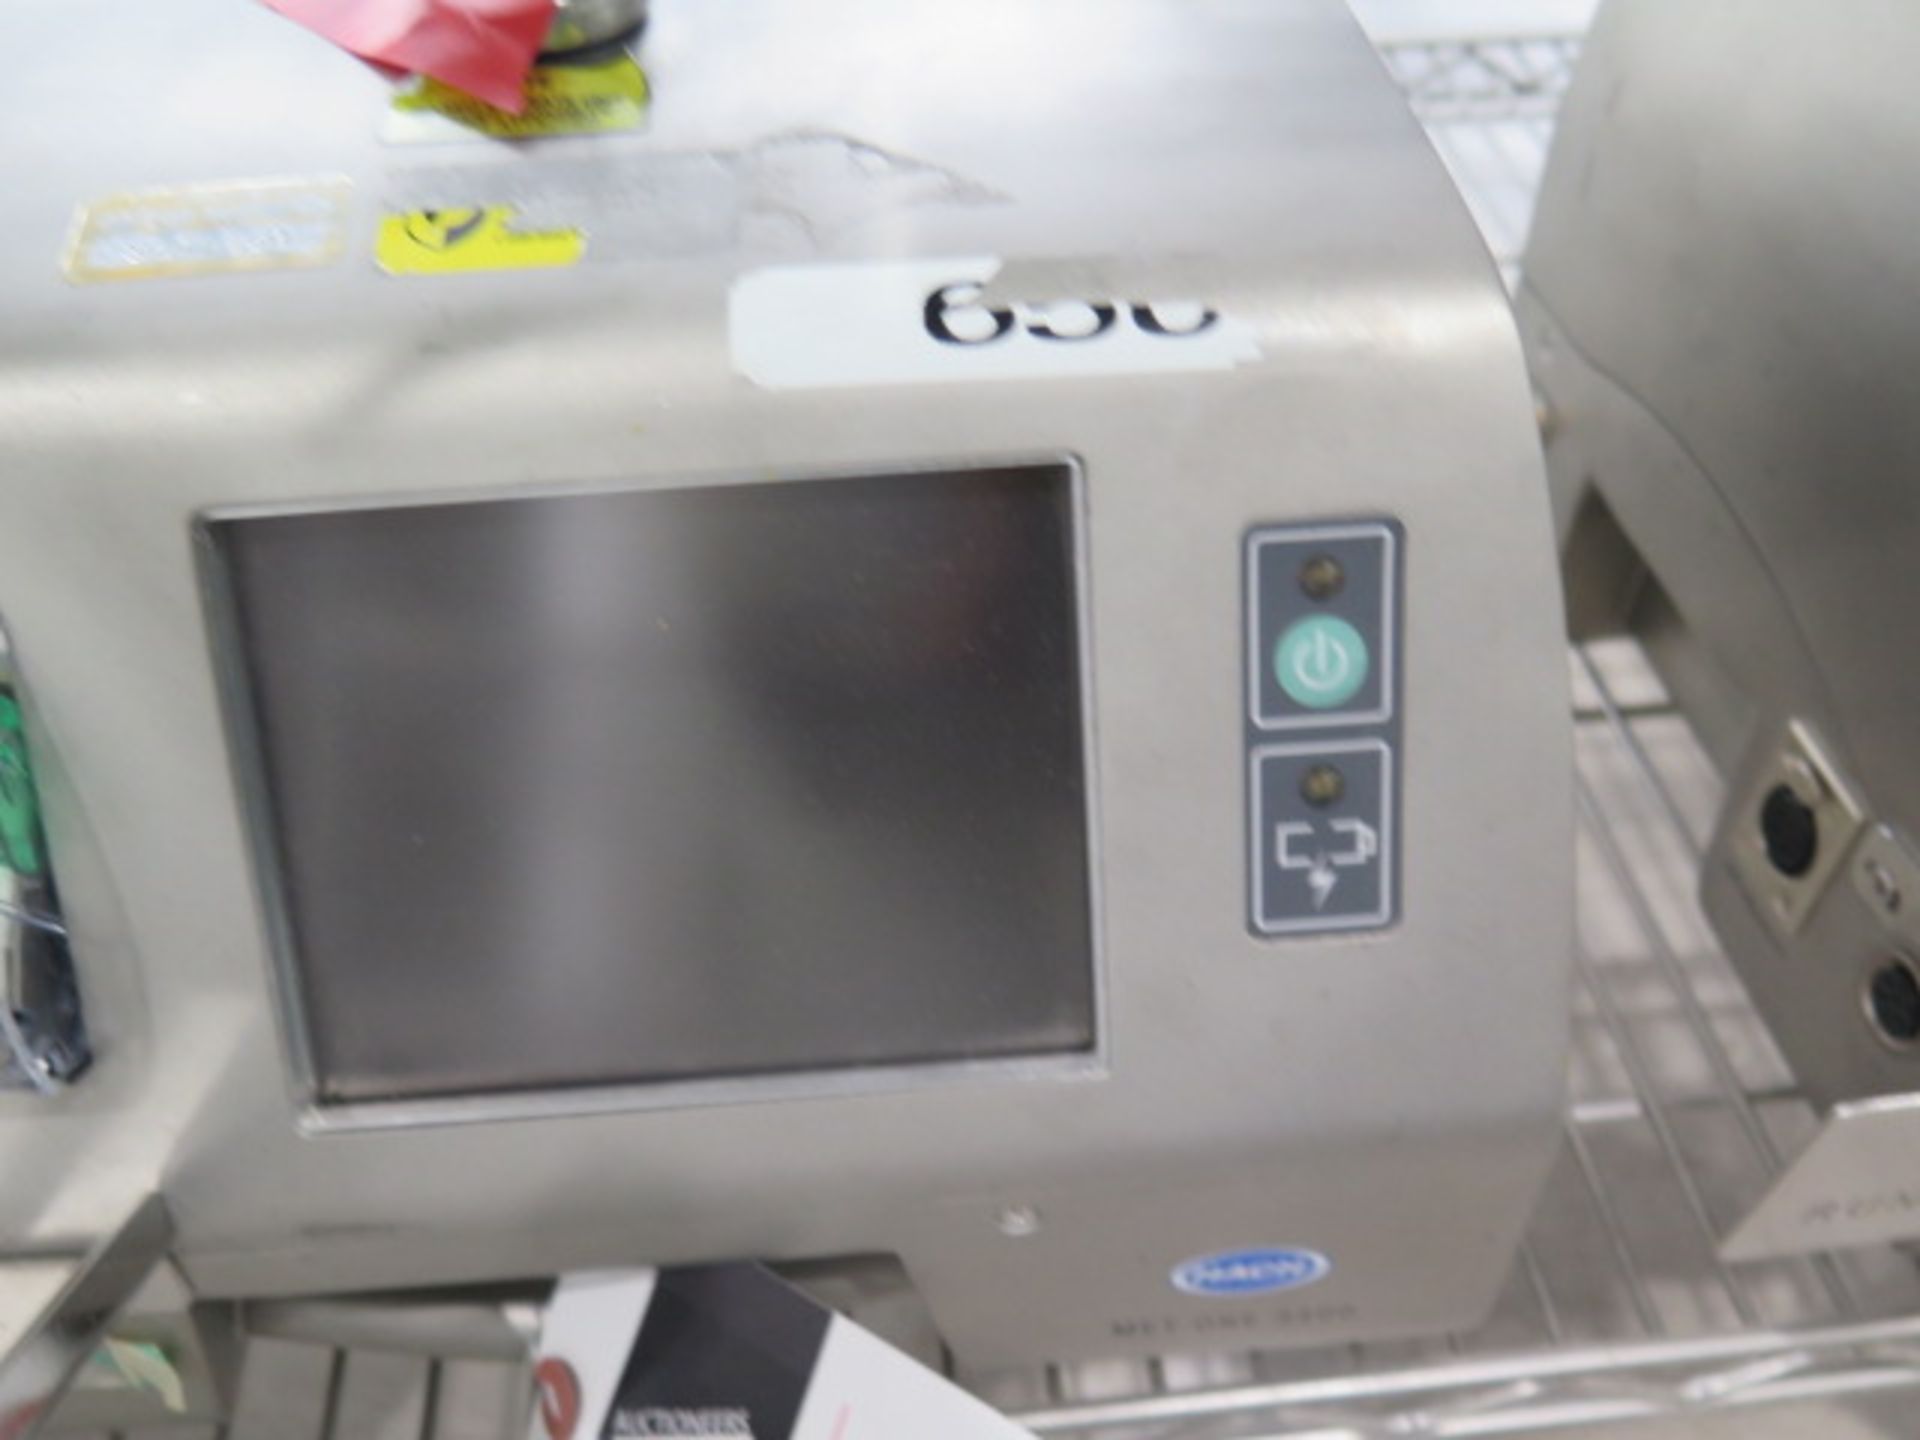 Hach MET ONE 3400 mdl. 3445 Particle Counter w/ Printer (SOLD AS-IS - NO WARRANTY) - Image 5 of 7